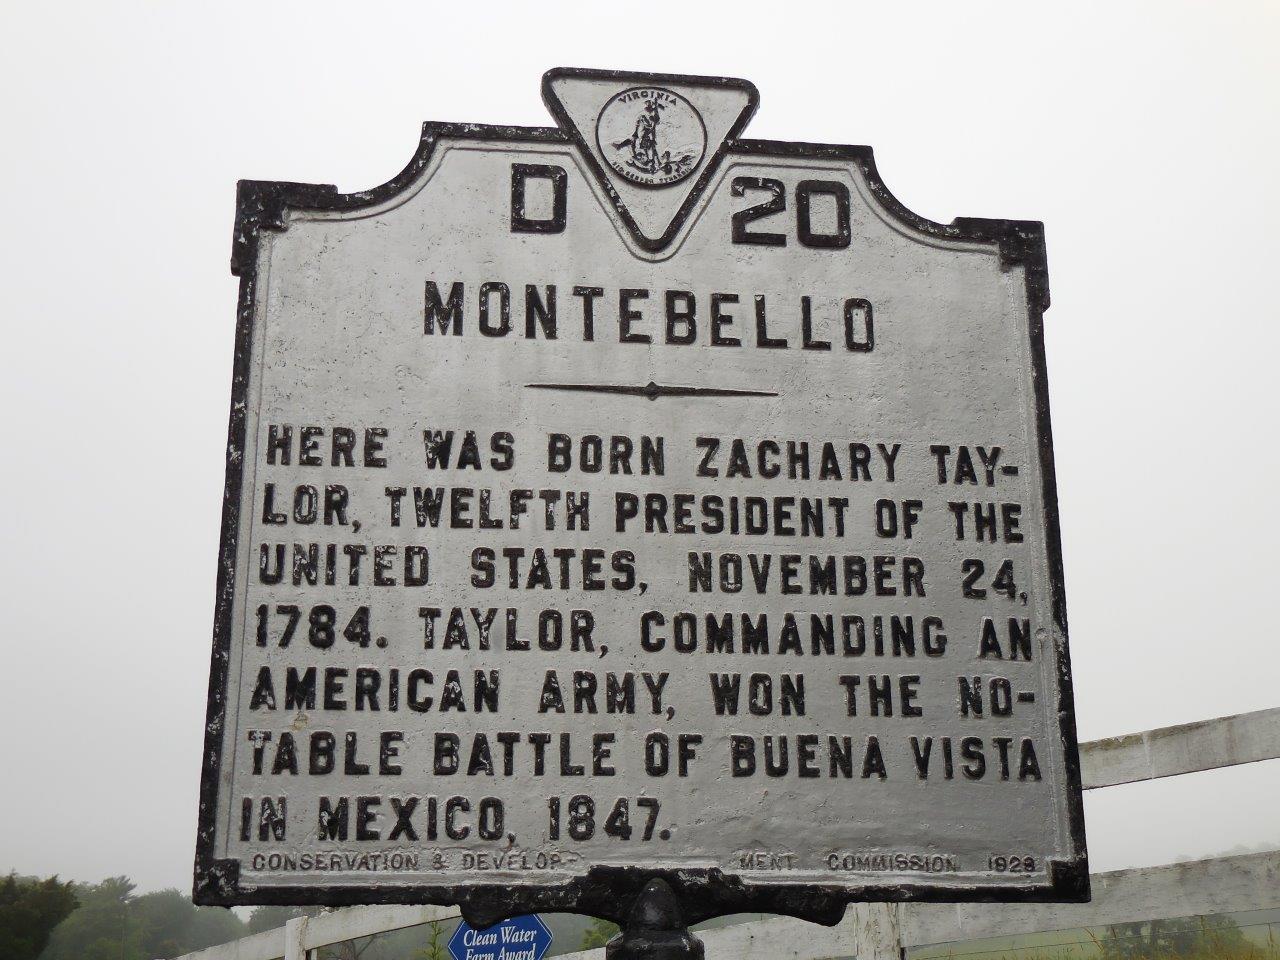 Zachary Taylor Montebello birthplace historical marker